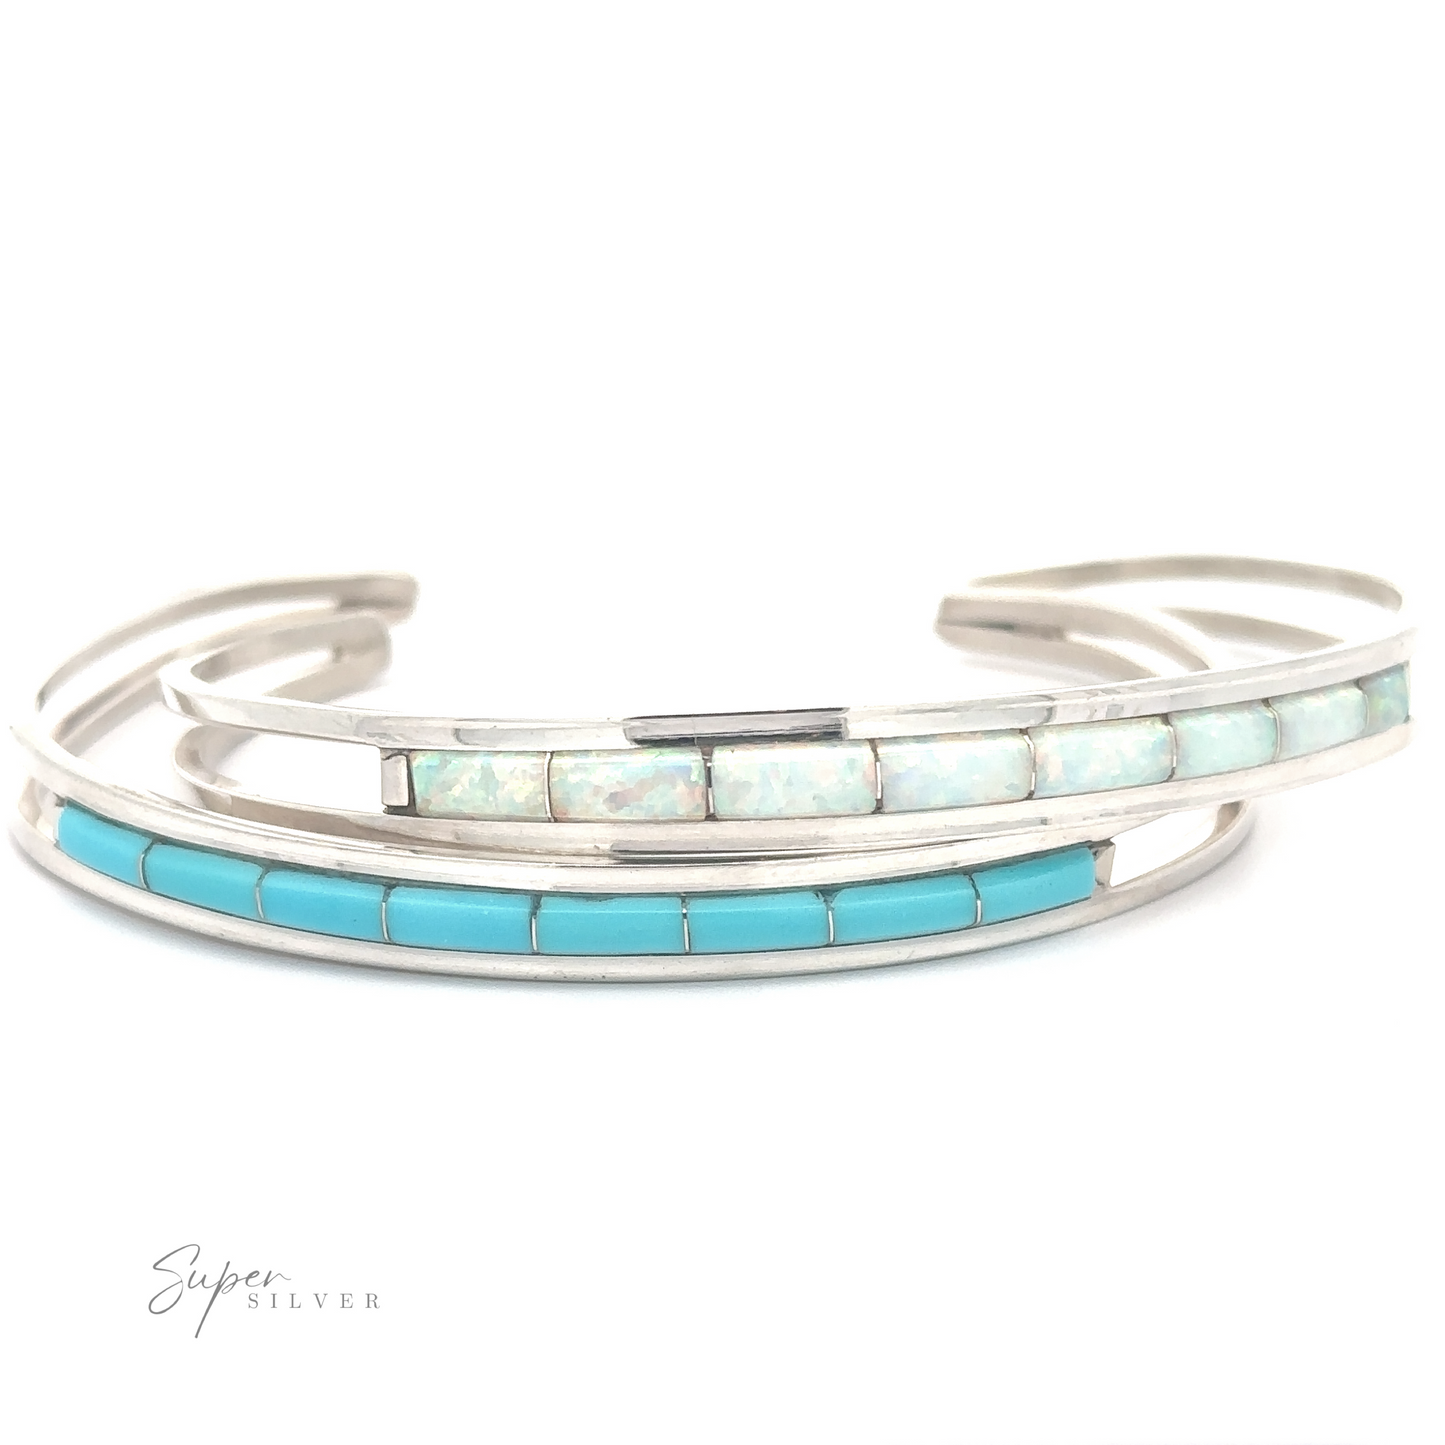 Chic Native American Cuff With Inlaid Stones bracelet with turquoise and opal inlay.